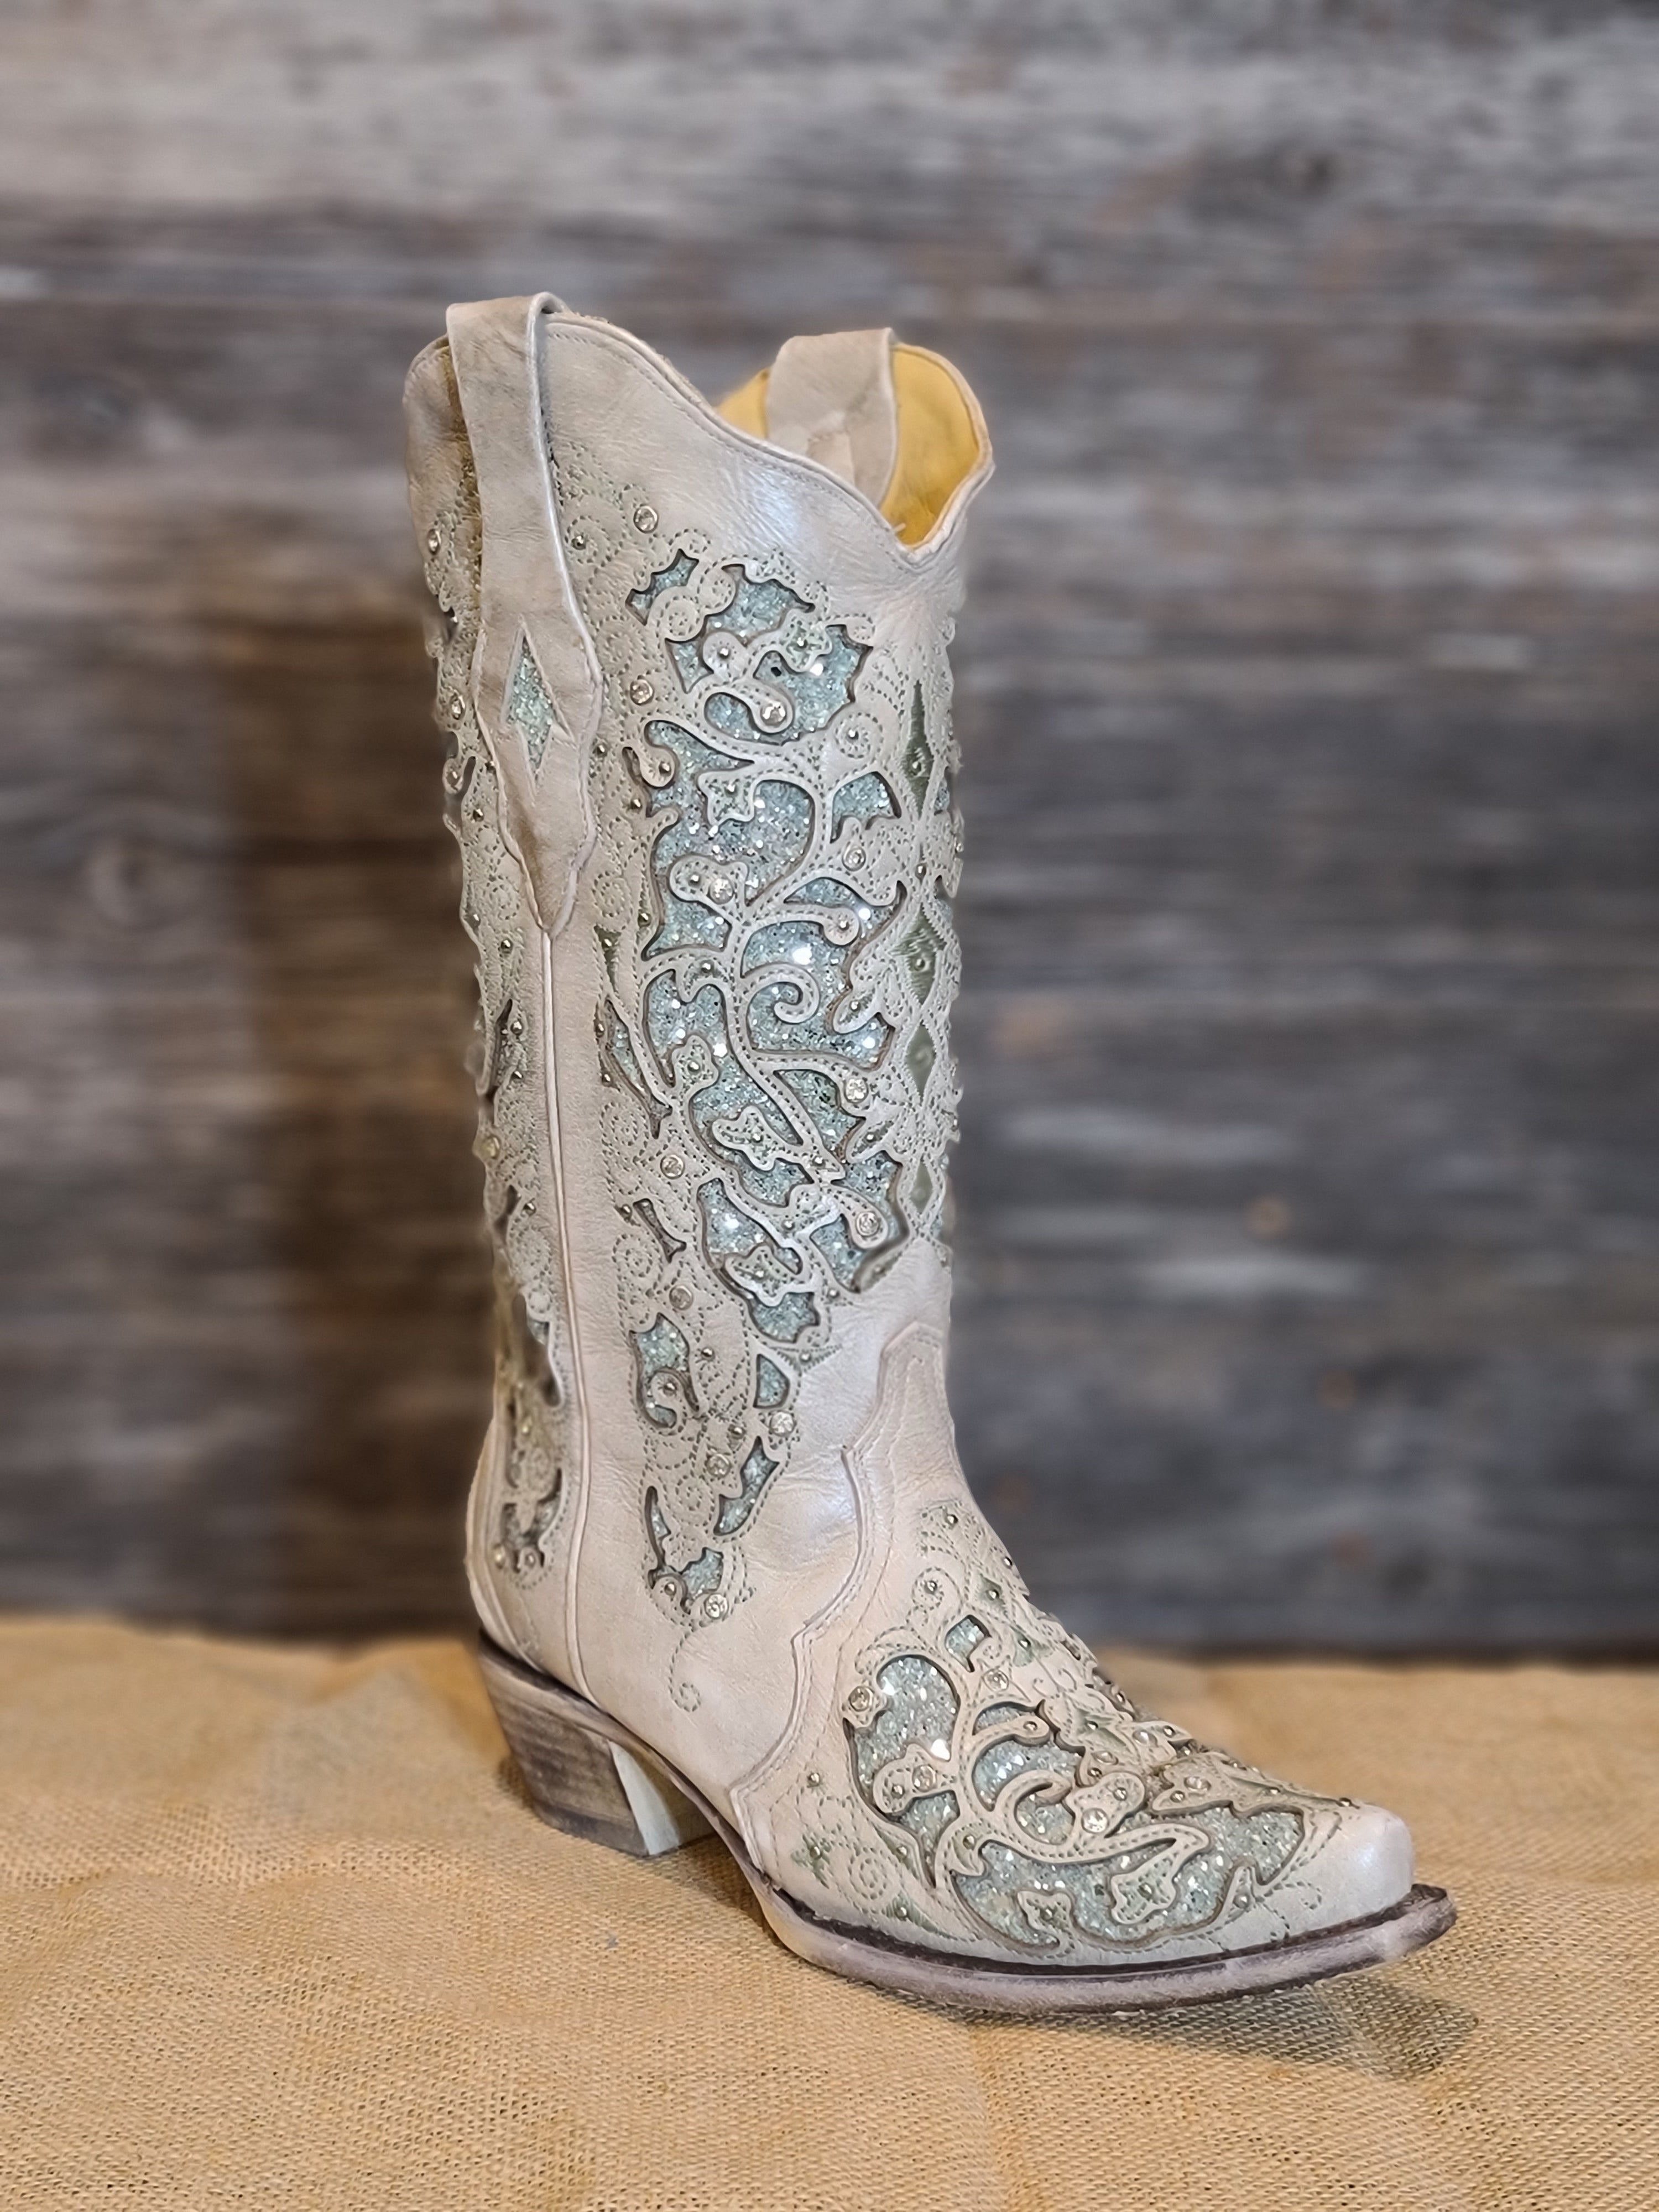 Corral Ladies Martina Green White Glitter Crystals Wedding Boots A3321